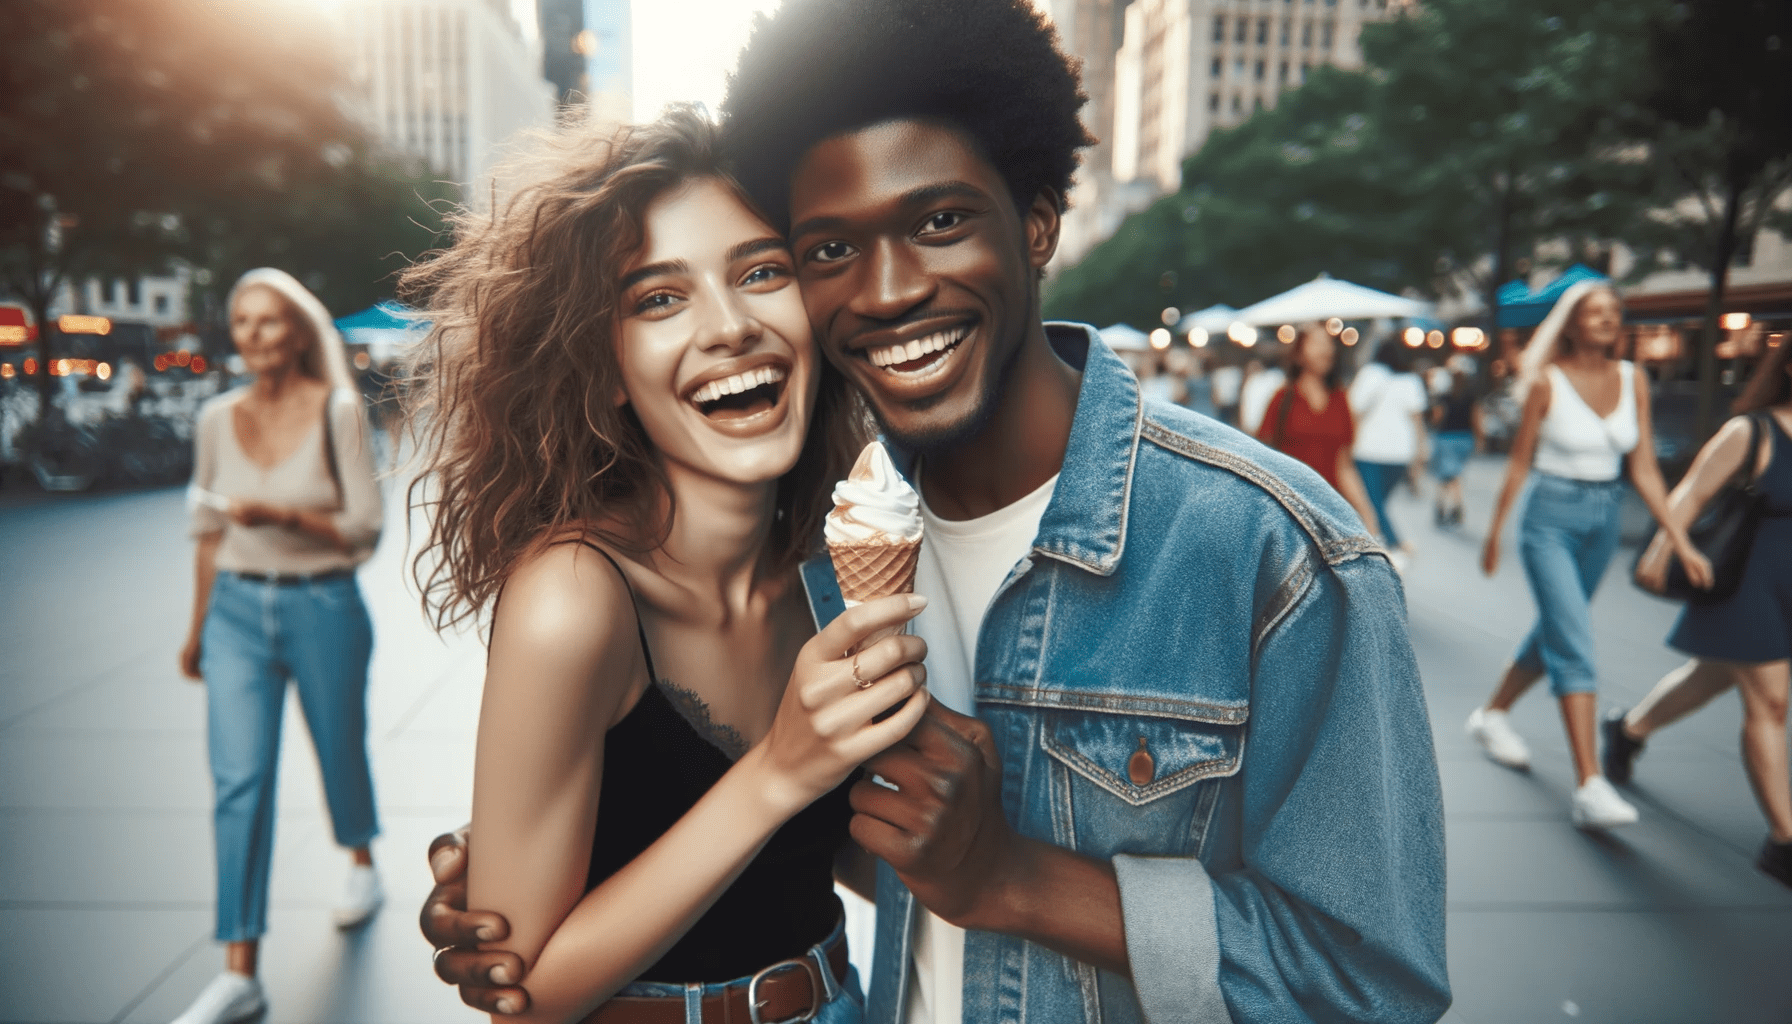 loving couple an African male with short curly hair and a Caucasian female with wavy brown hair laughing together as